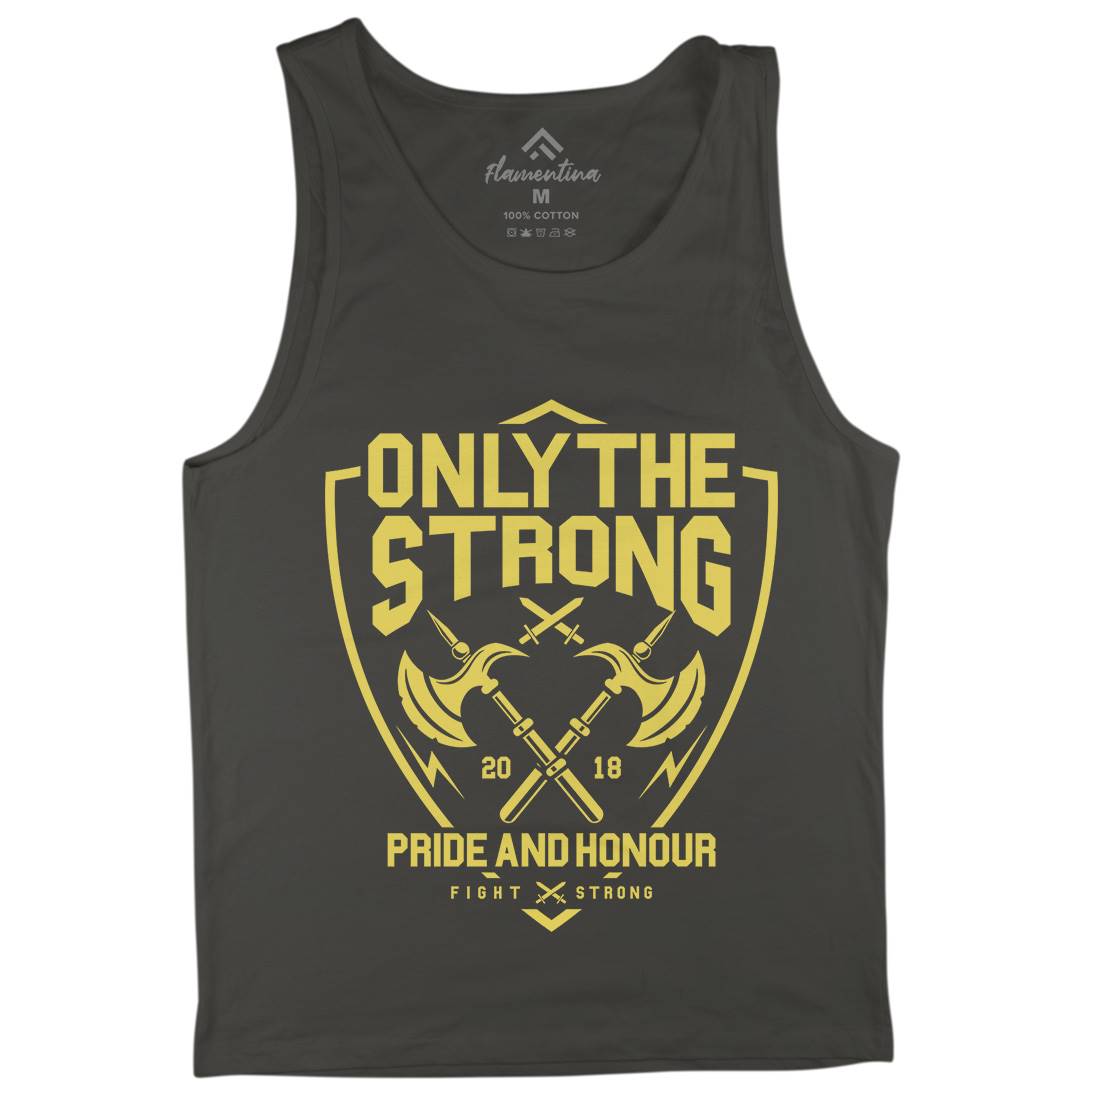 Only The Strong Mens Tank Top Vest Quotes A257